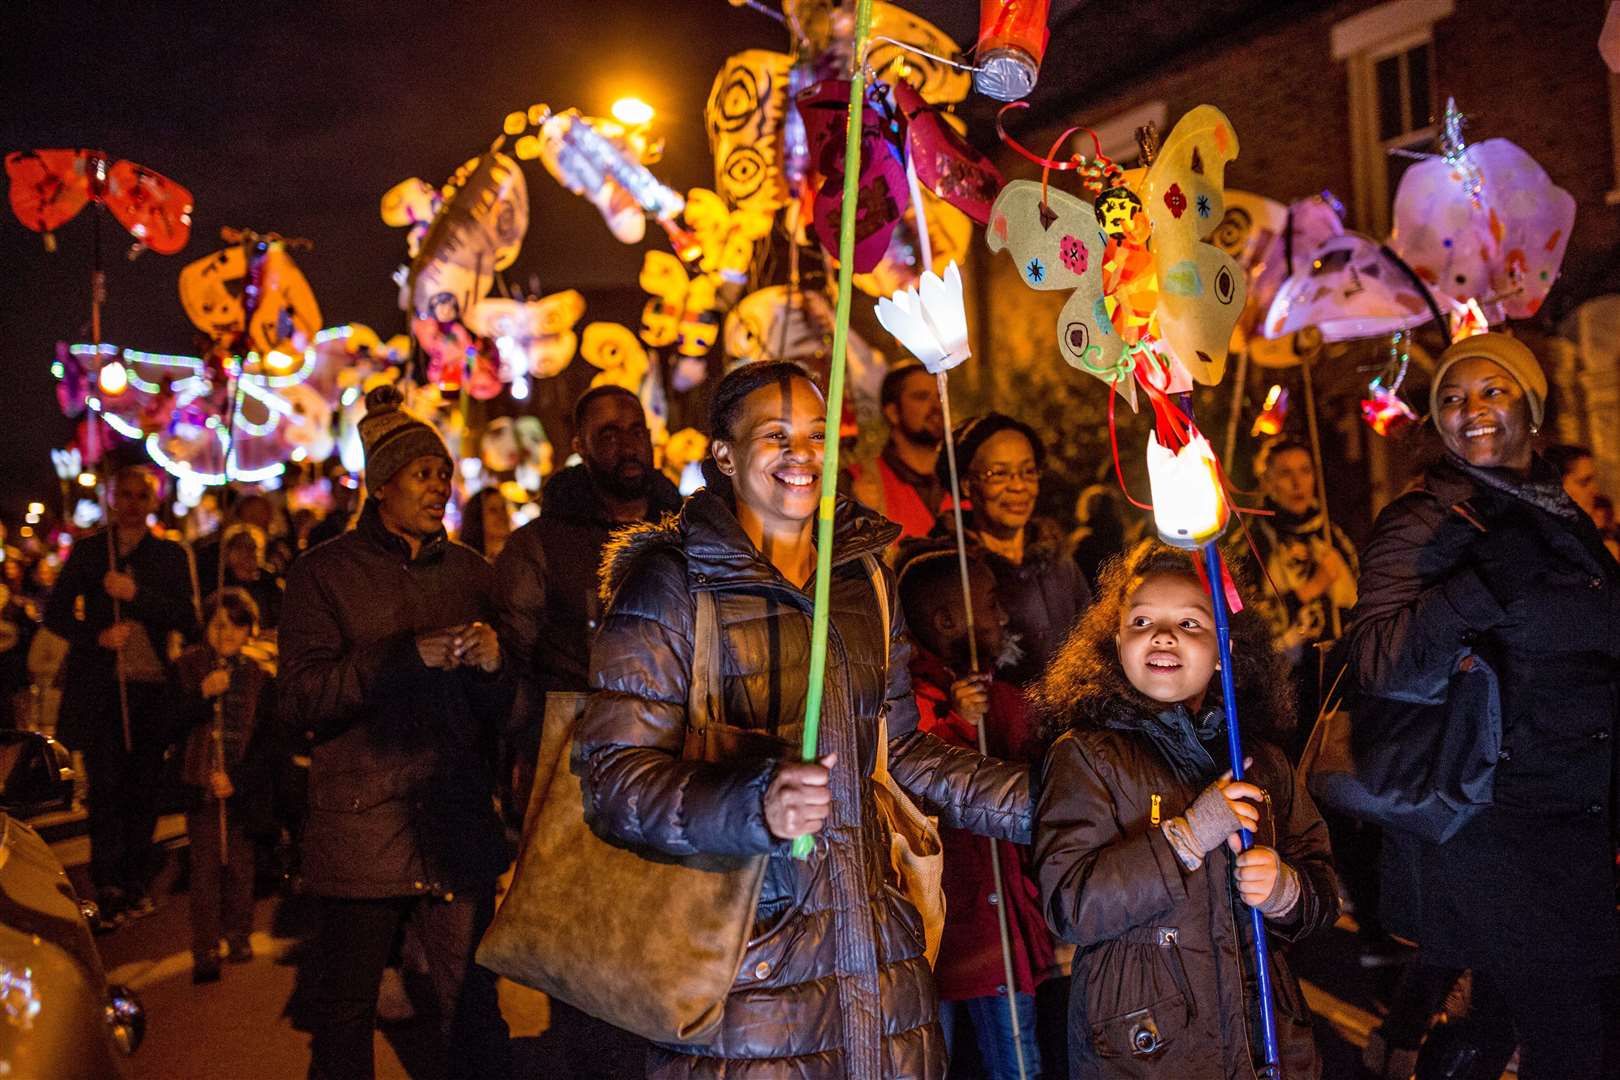 Lantern making at the Carnival of the Baubles in Ashford last year